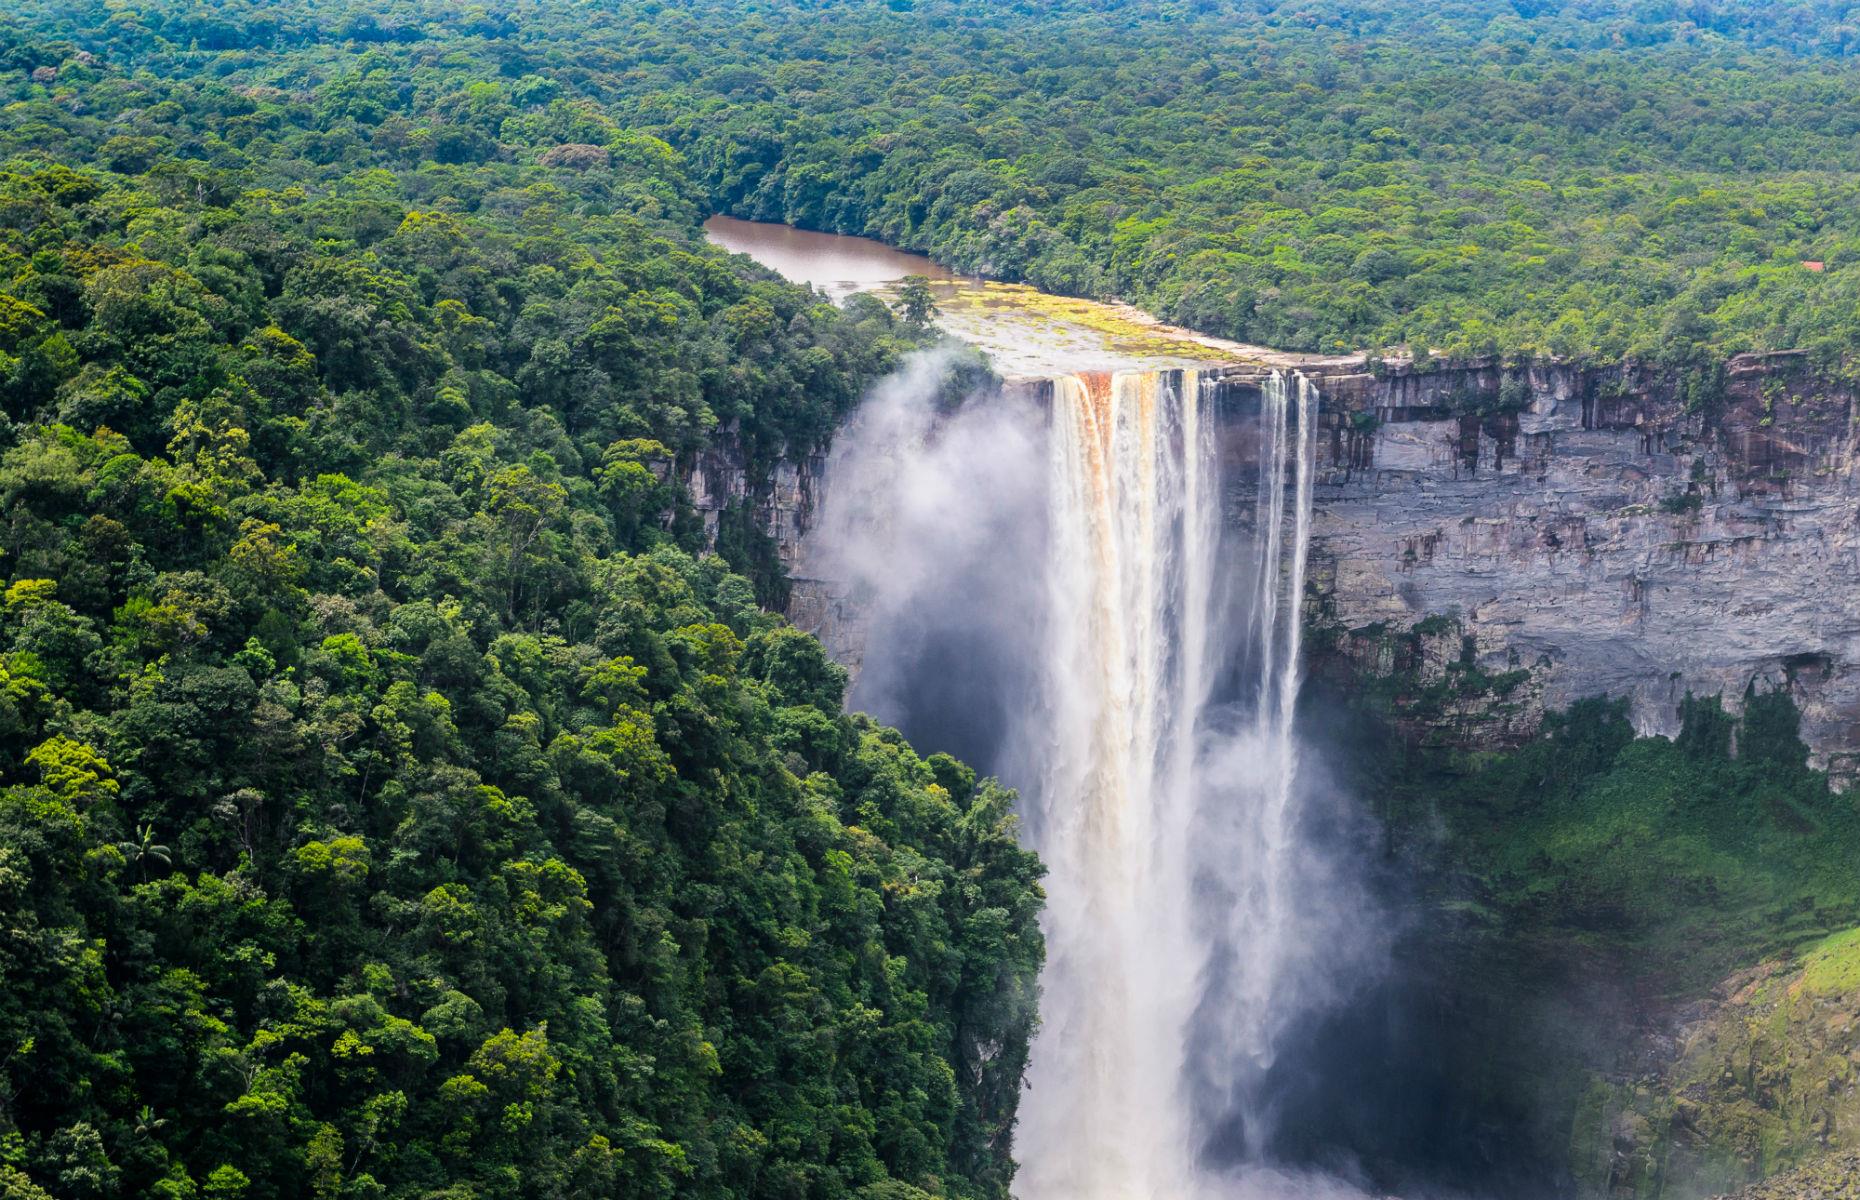 <p>To visit a waterfall that’s just as powerful and impressive as Niagara Falls or Iguazu Falls but with a fraction of the crowds and tourists, you need to head to Guyana’s Kaieteur Falls in the verdant Kaieteur National Park. Five times taller than Niagara, this is the world’s highest single-drop waterfall, and with 30,000 gallons of water thundering over the 820-foot cliff, visiting is a memorable, beautiful, and noisy experience.</p>